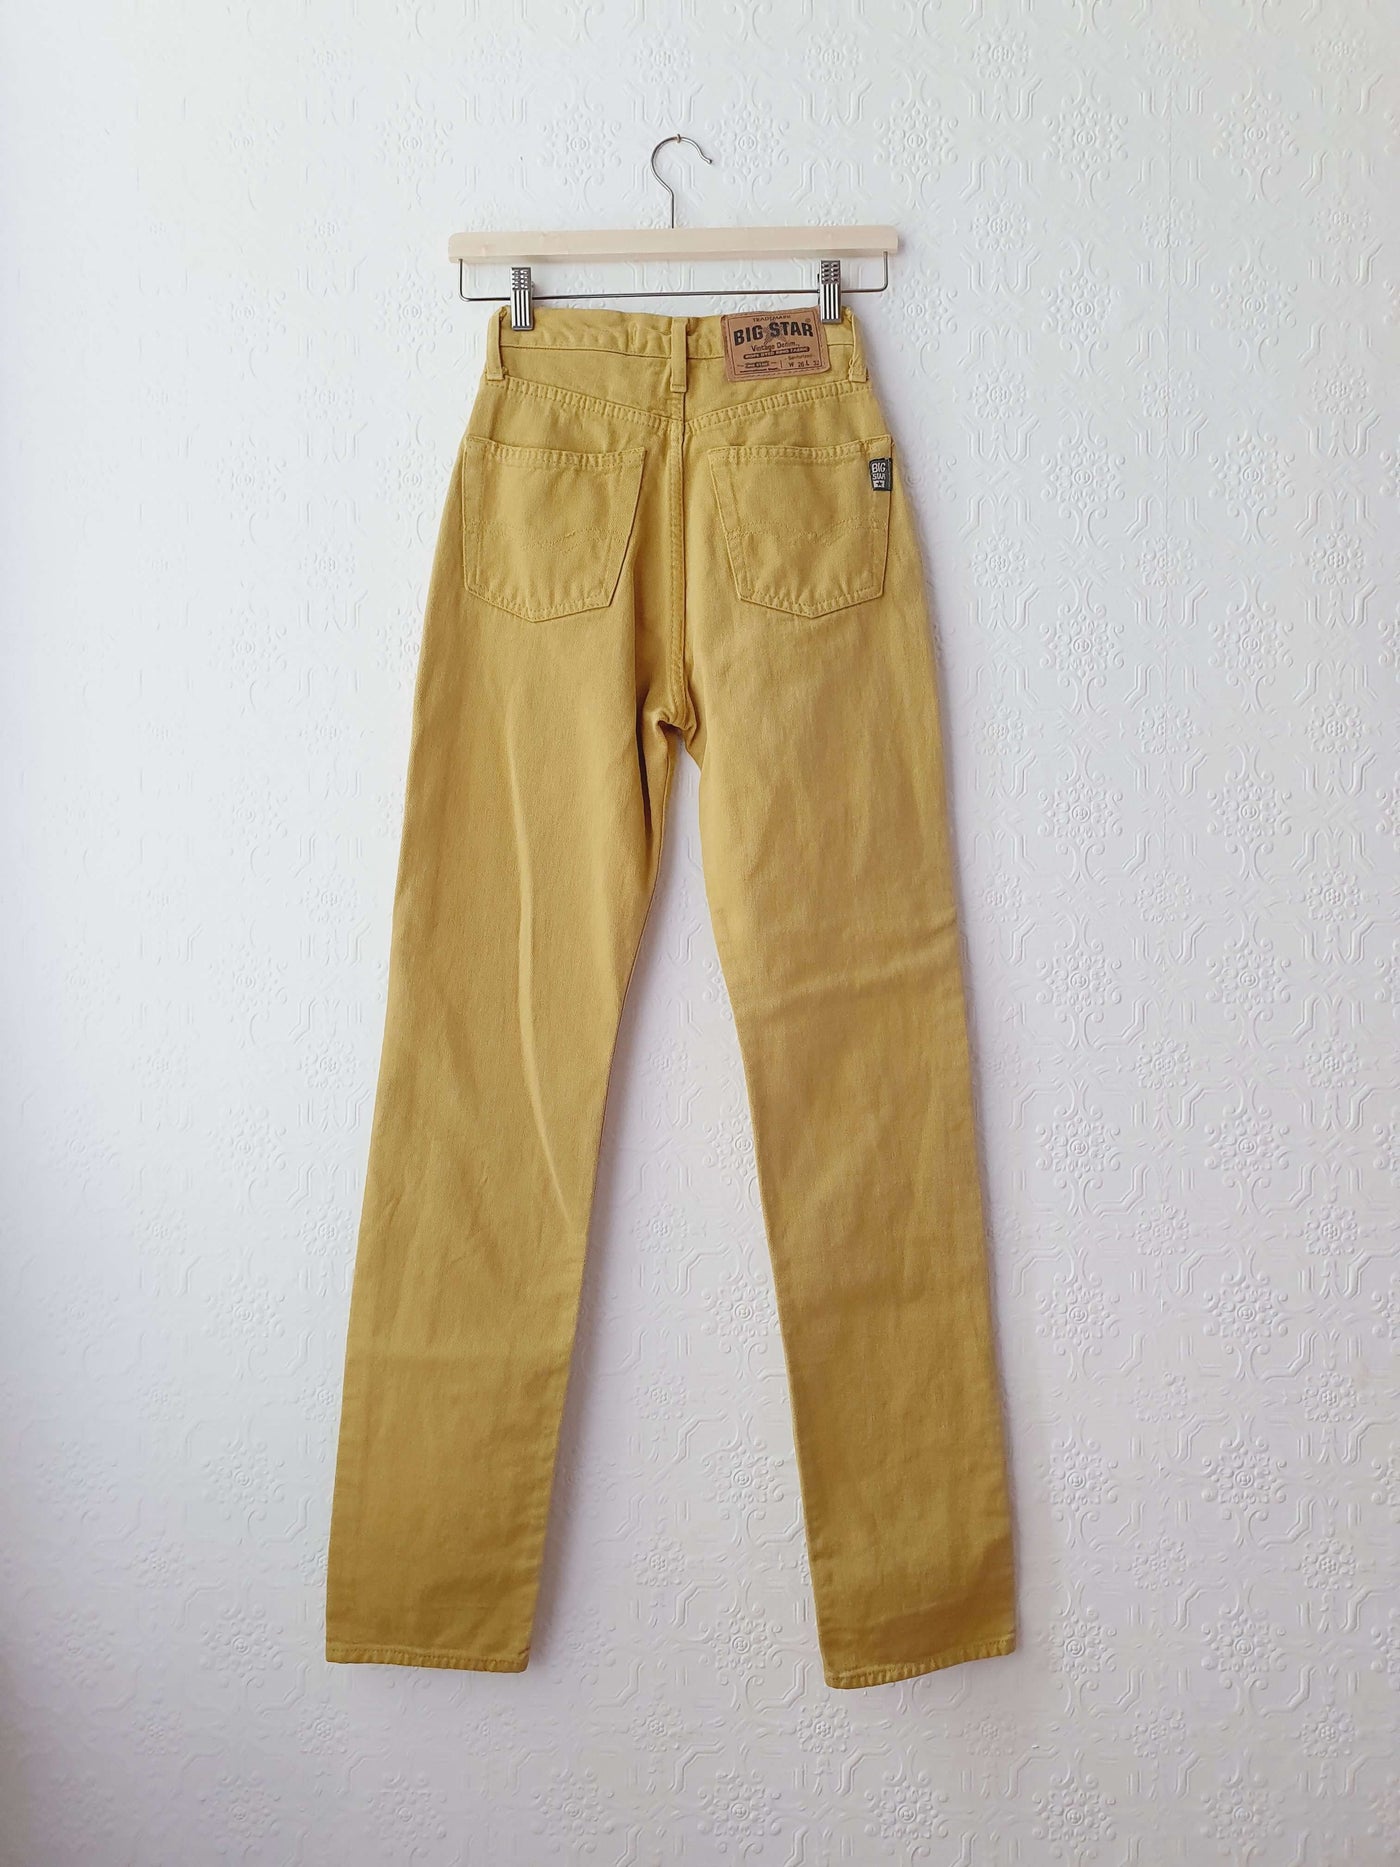 Vintage High Waisted Yellow Ochre Jeans - 24W 31L